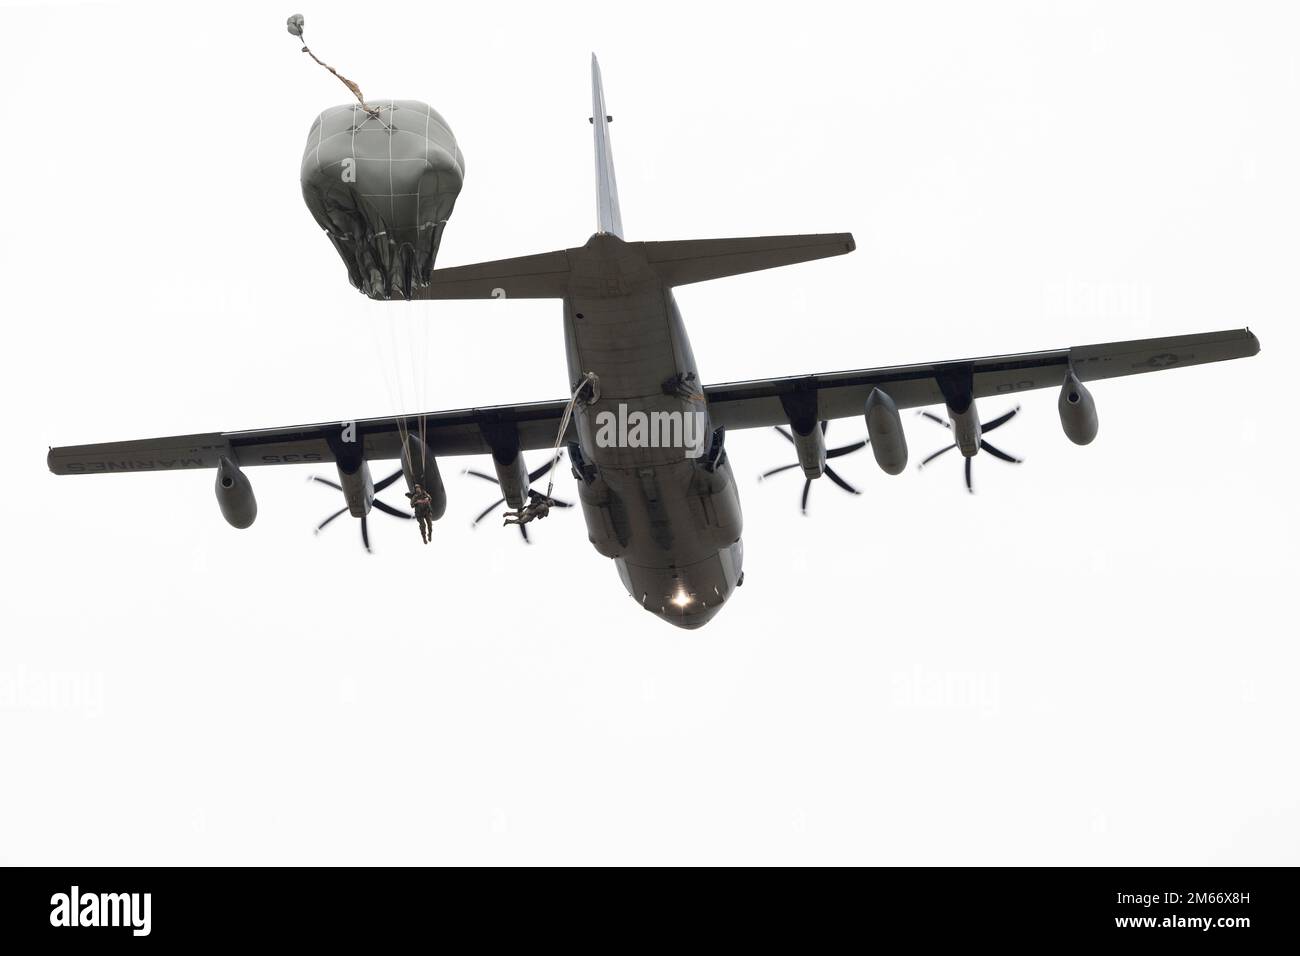 U.S. Army paratroopers assigned to the 2nd Infantry Brigade Combat Team (Airborne), 11th Airborne Division, “Arctic Angels,” jump from a U.S. Marine Corps KC-130J Super Hercules during airborne operations over Malemute Drop Zone at Joint Base Elmendorf-Richardson, Alaska, Oct. 7, 2022. The aircrew and aircraft were assigned to Marine Aerial Refueler Transport Squadron 152 out of Marine Corps Air Station Iwakuni, Japan. The Arctic Angels stay proficient at their primary function of being a Joint Forcible Entry unit, able to respond and project power across the Pacific within 18 hours. (U.S. Air Stock Photo